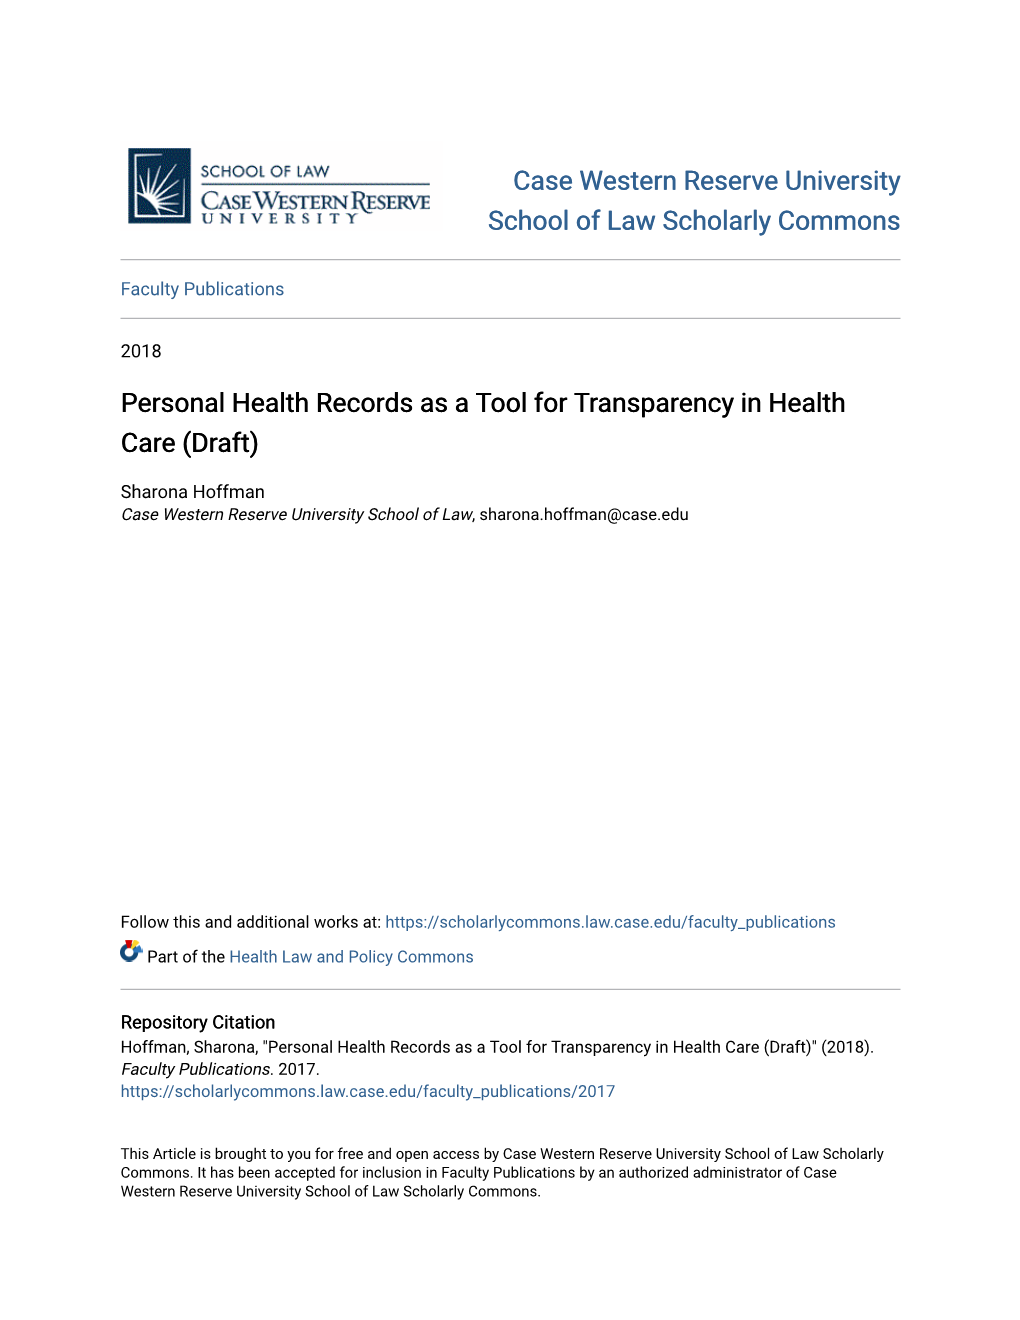 Personal Health Records As a Tool for Transparency in Health Care (Draft)